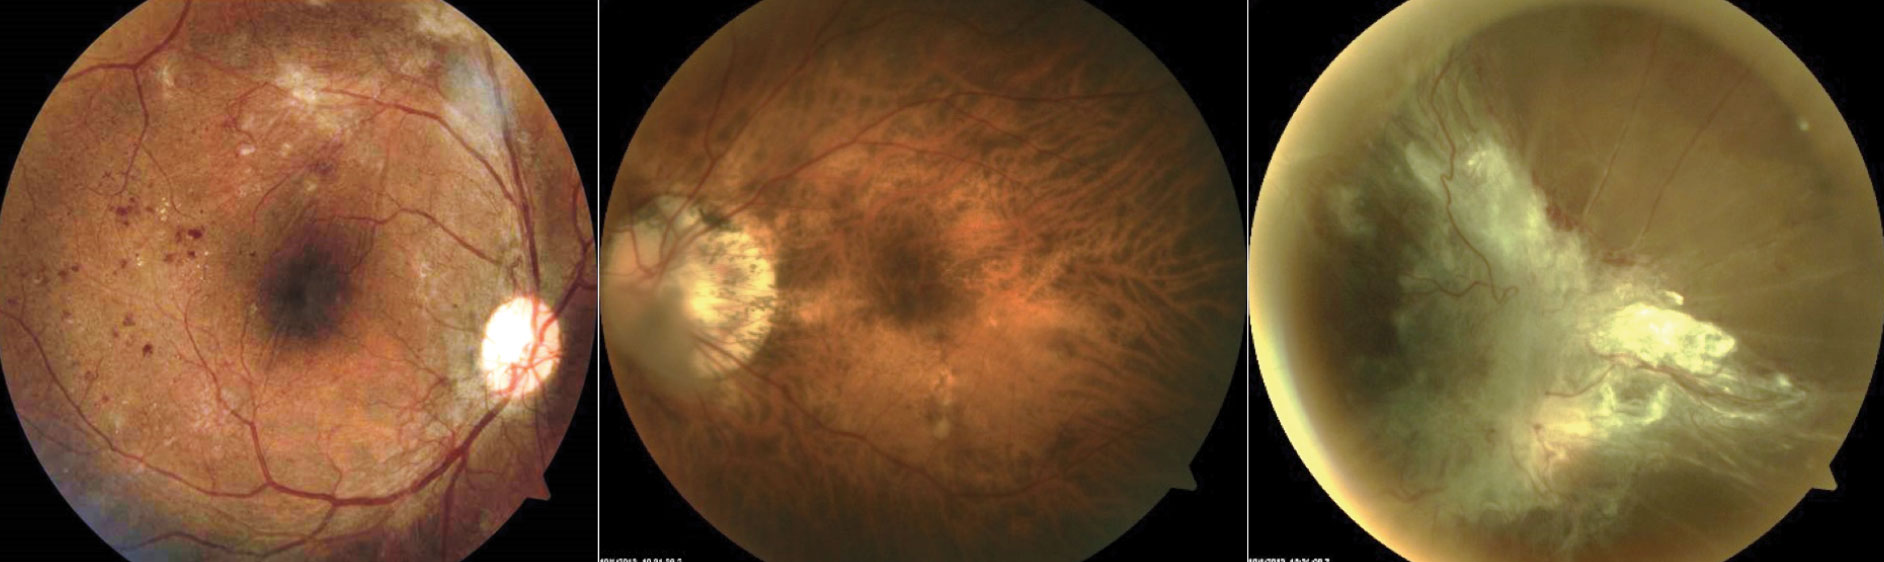 Fig. 3. These fundus images show, from left to right, a patient who has high risk PDR OD: >1/4D-1/3D of NVD inferiorly and NVE superiorly with fibrovascular tissue causing vertical retinal folds through macula; a patient with high myopia (-11.50DS), which can be protective against DR; large posterior vitreous detachment in front of the optic nerve head in the right eye of a patient who failed to seek treatment for PDR.